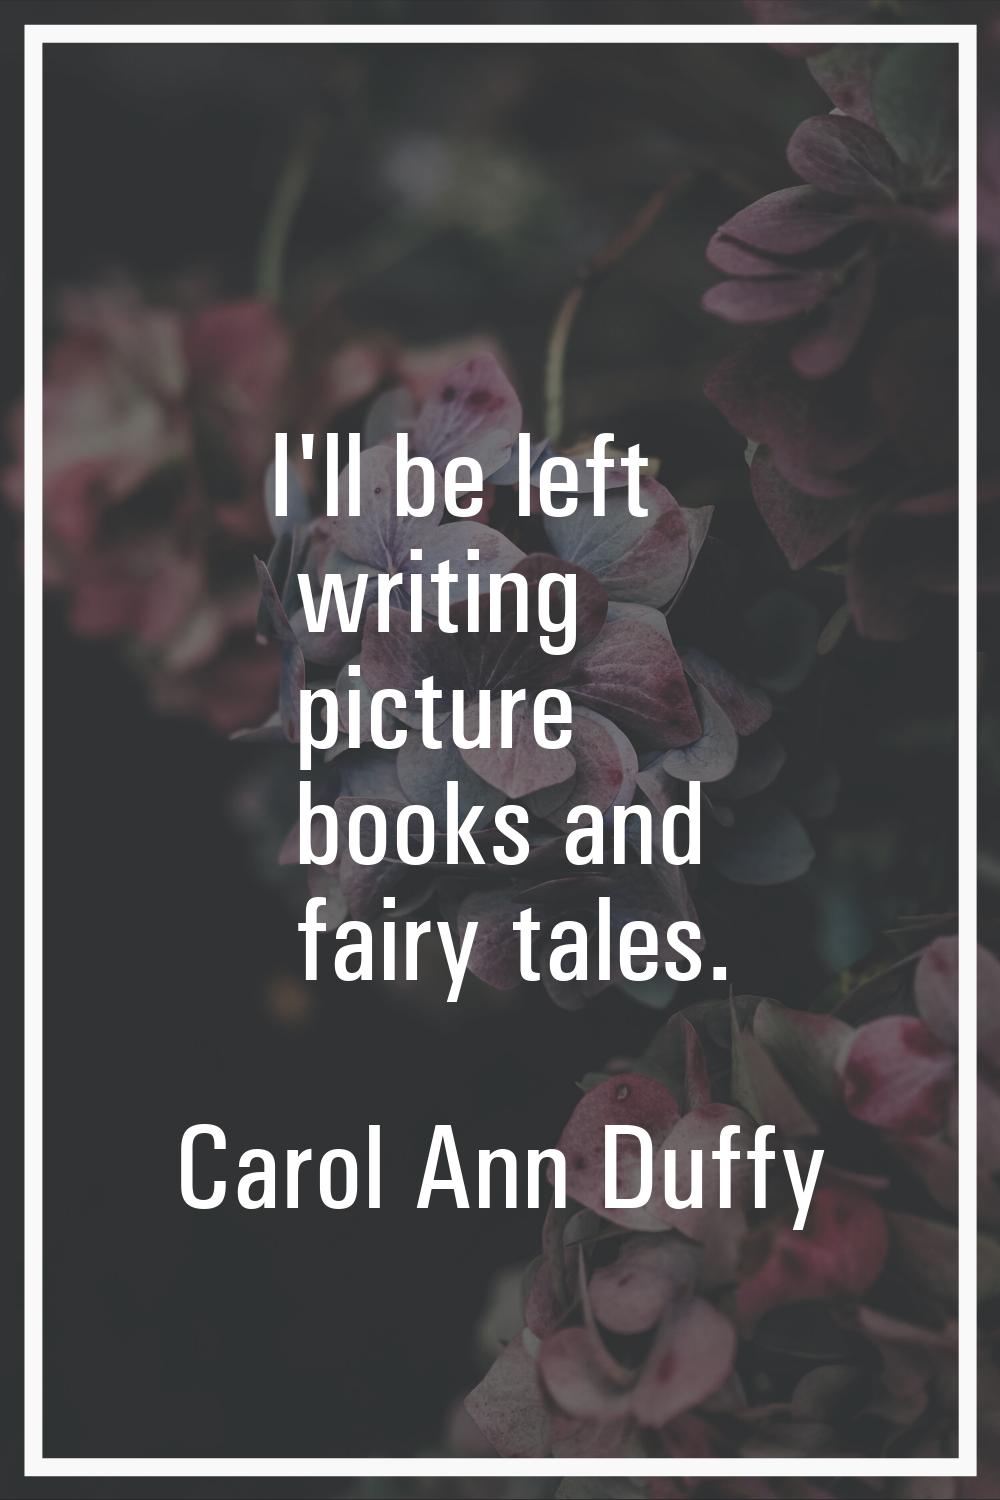 I'll be left writing picture books and fairy tales.